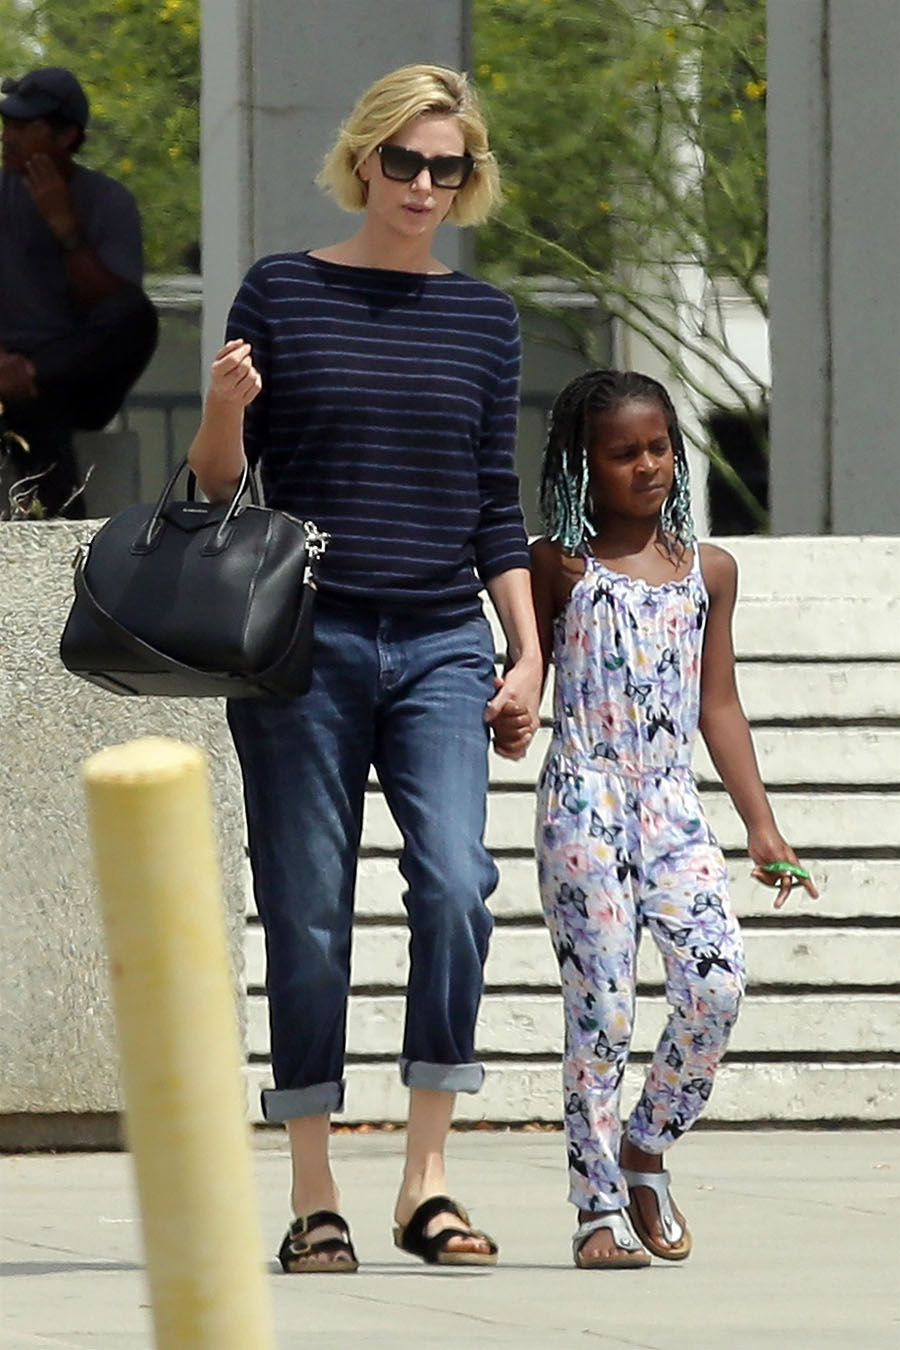 Charlize Theron is seen visiting the Federal Building in Los Angeles